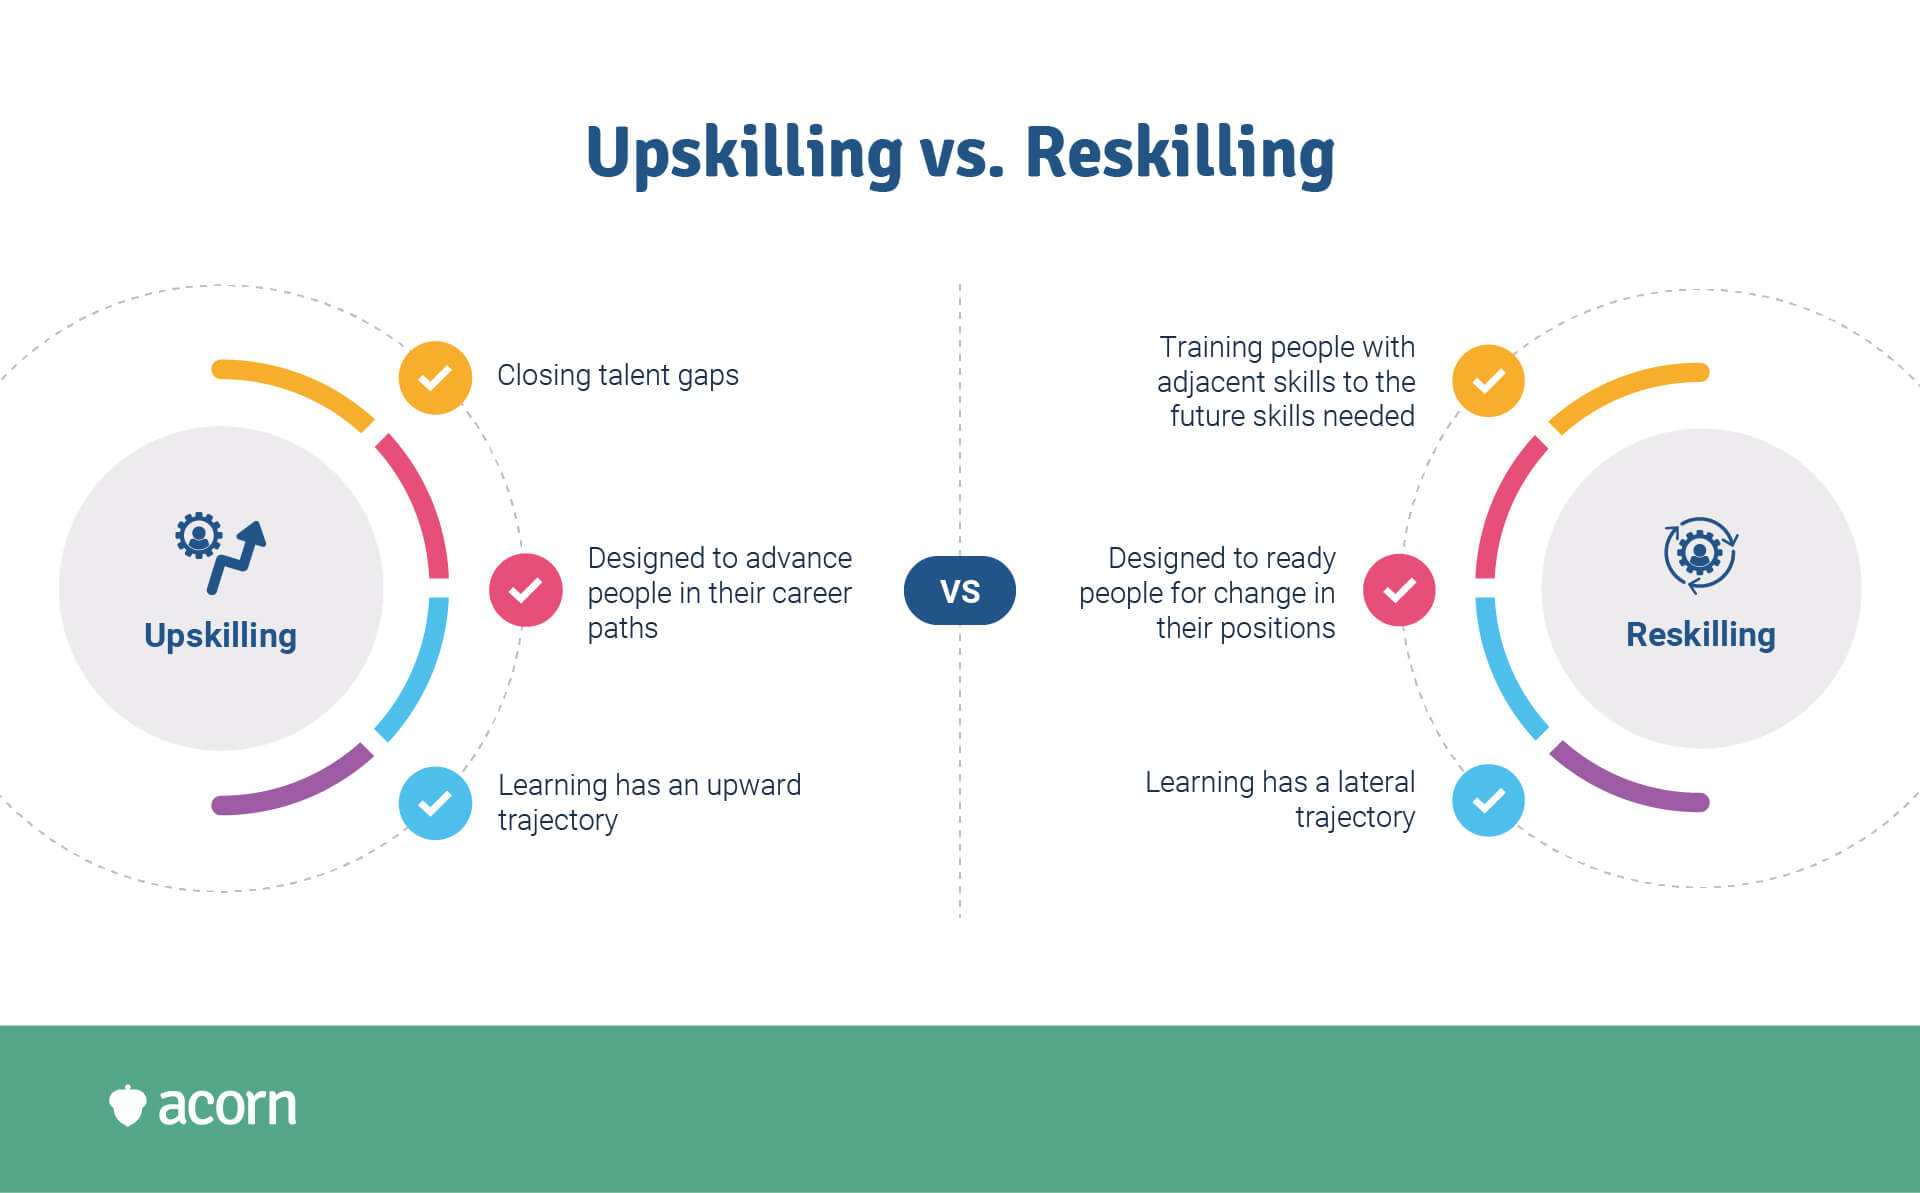 The difference between upskilling and reskilling